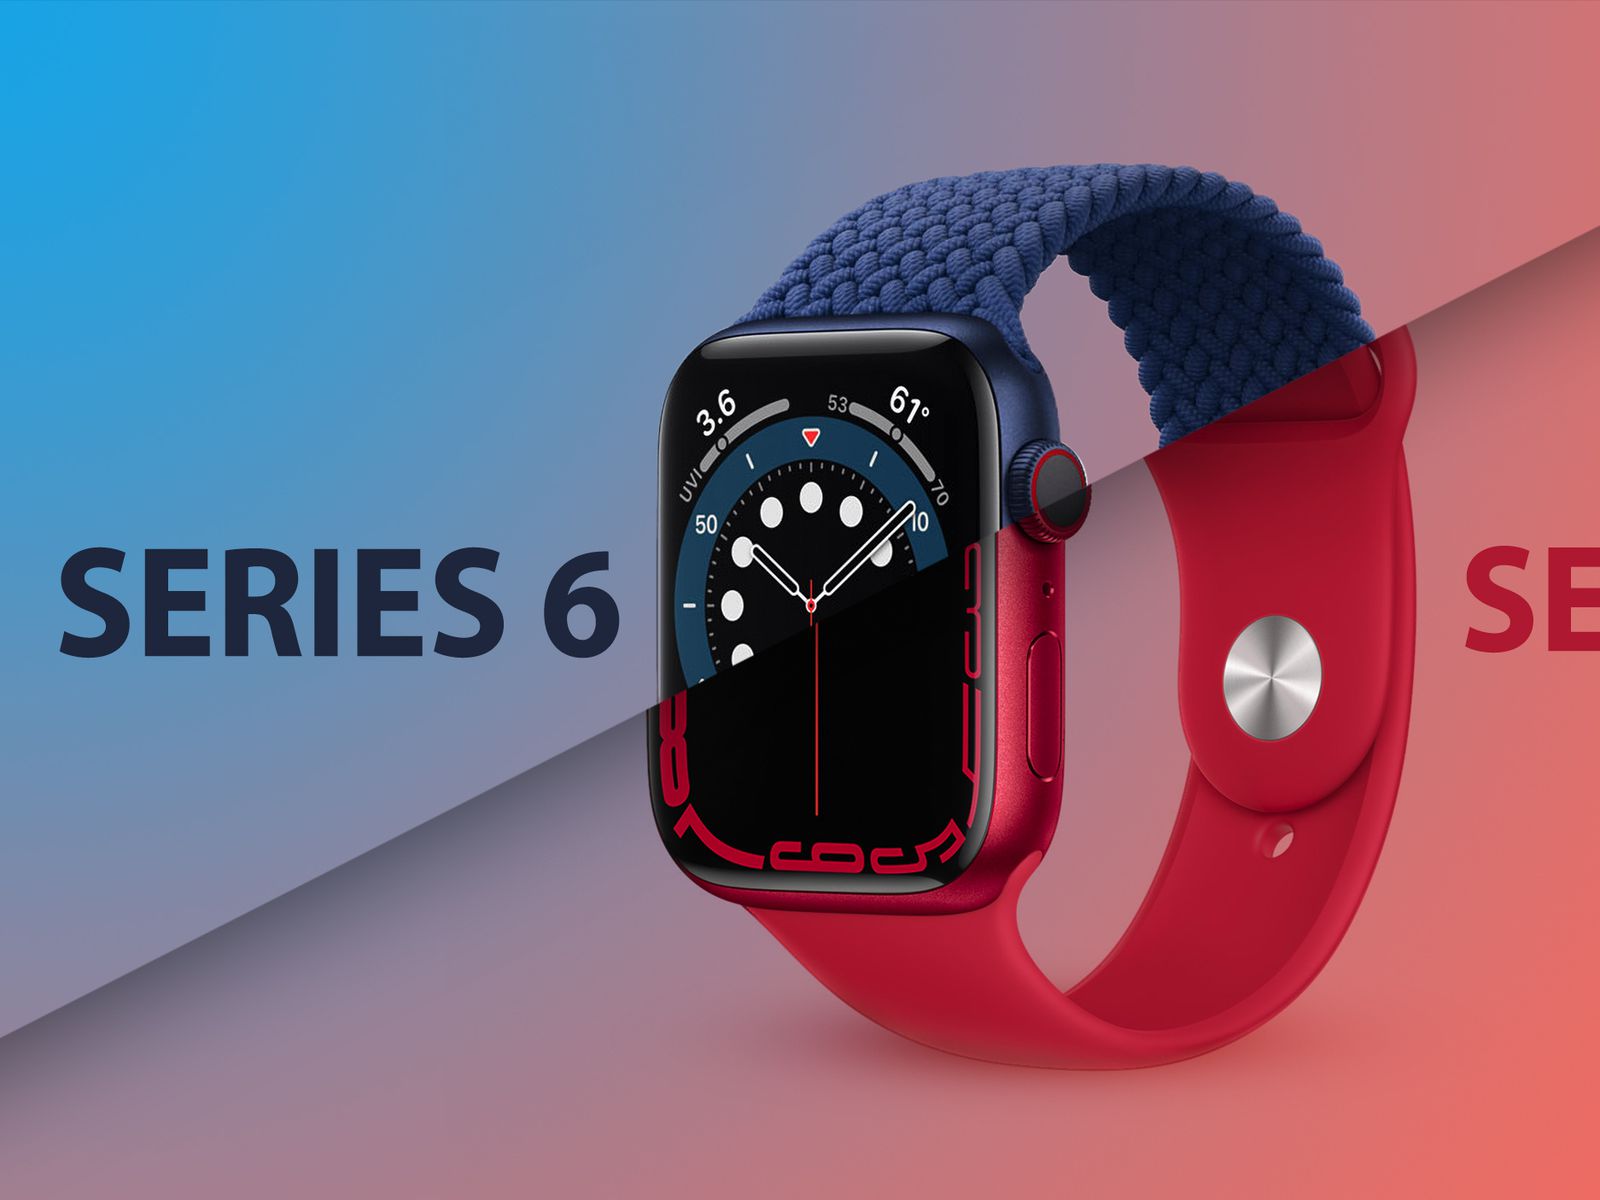 Apple Officially Discontinues Apple Watch Series 3 - MacRumors